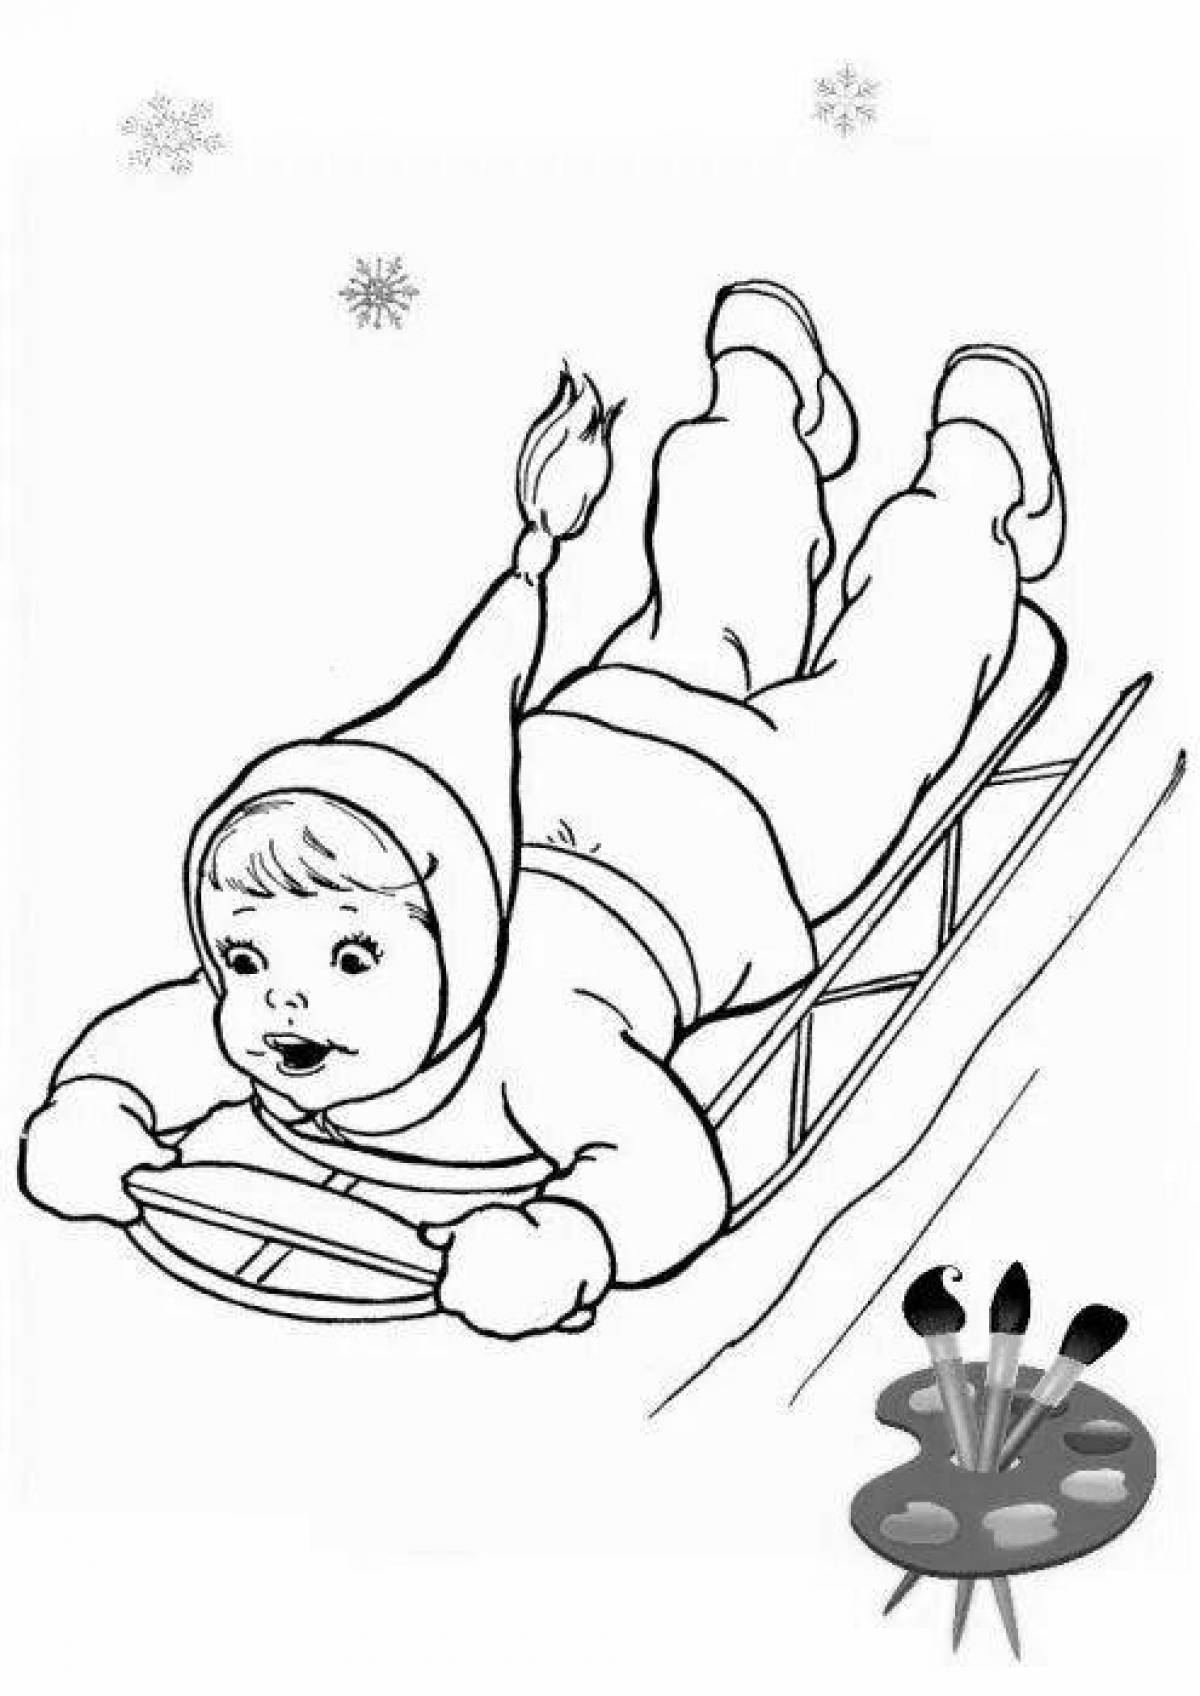 Fun nose coloring page